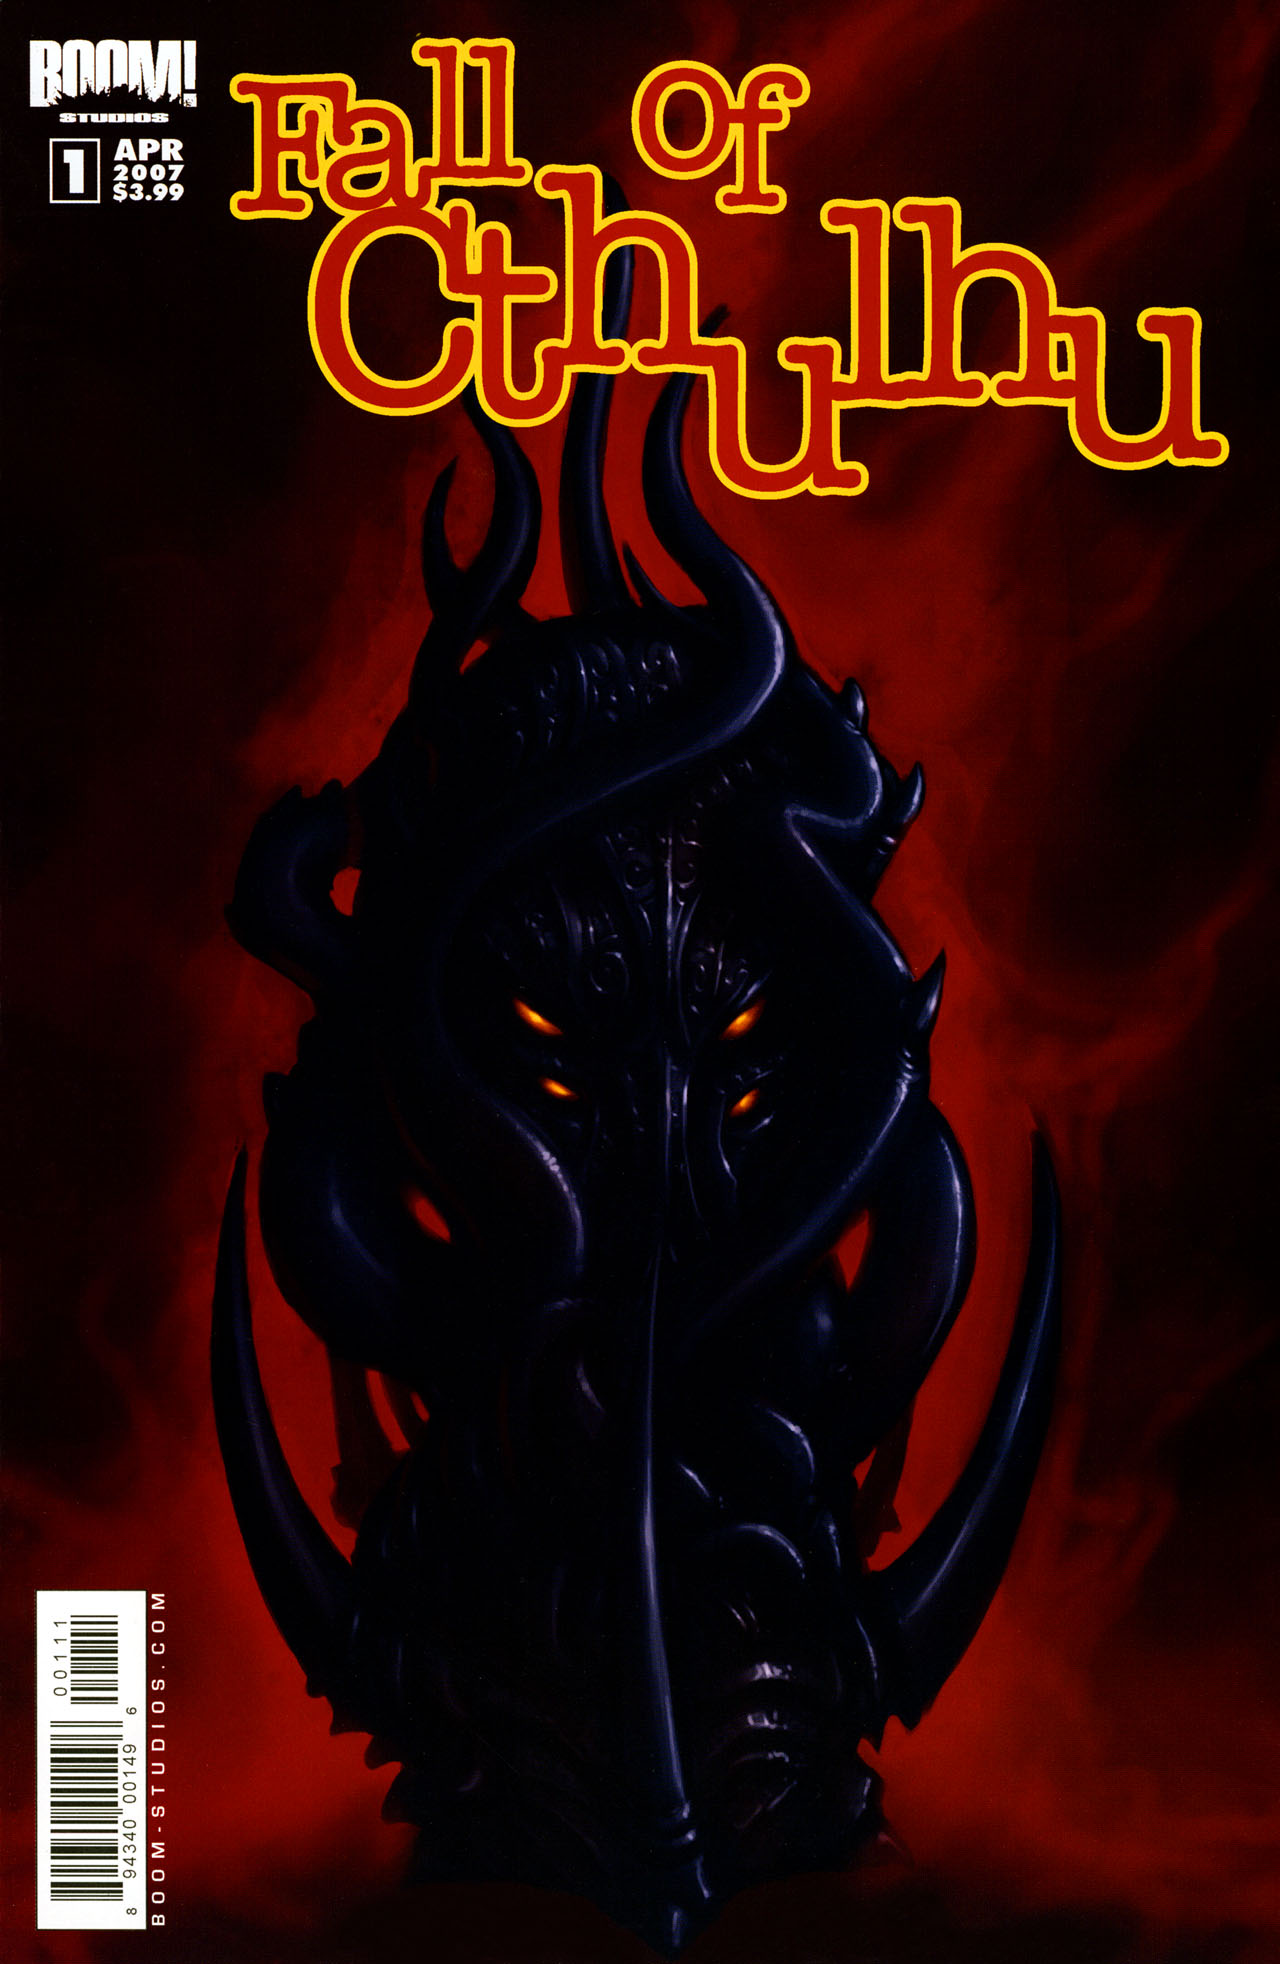 Read online Fall of Cthulhu comic -  Issue #1 - 1